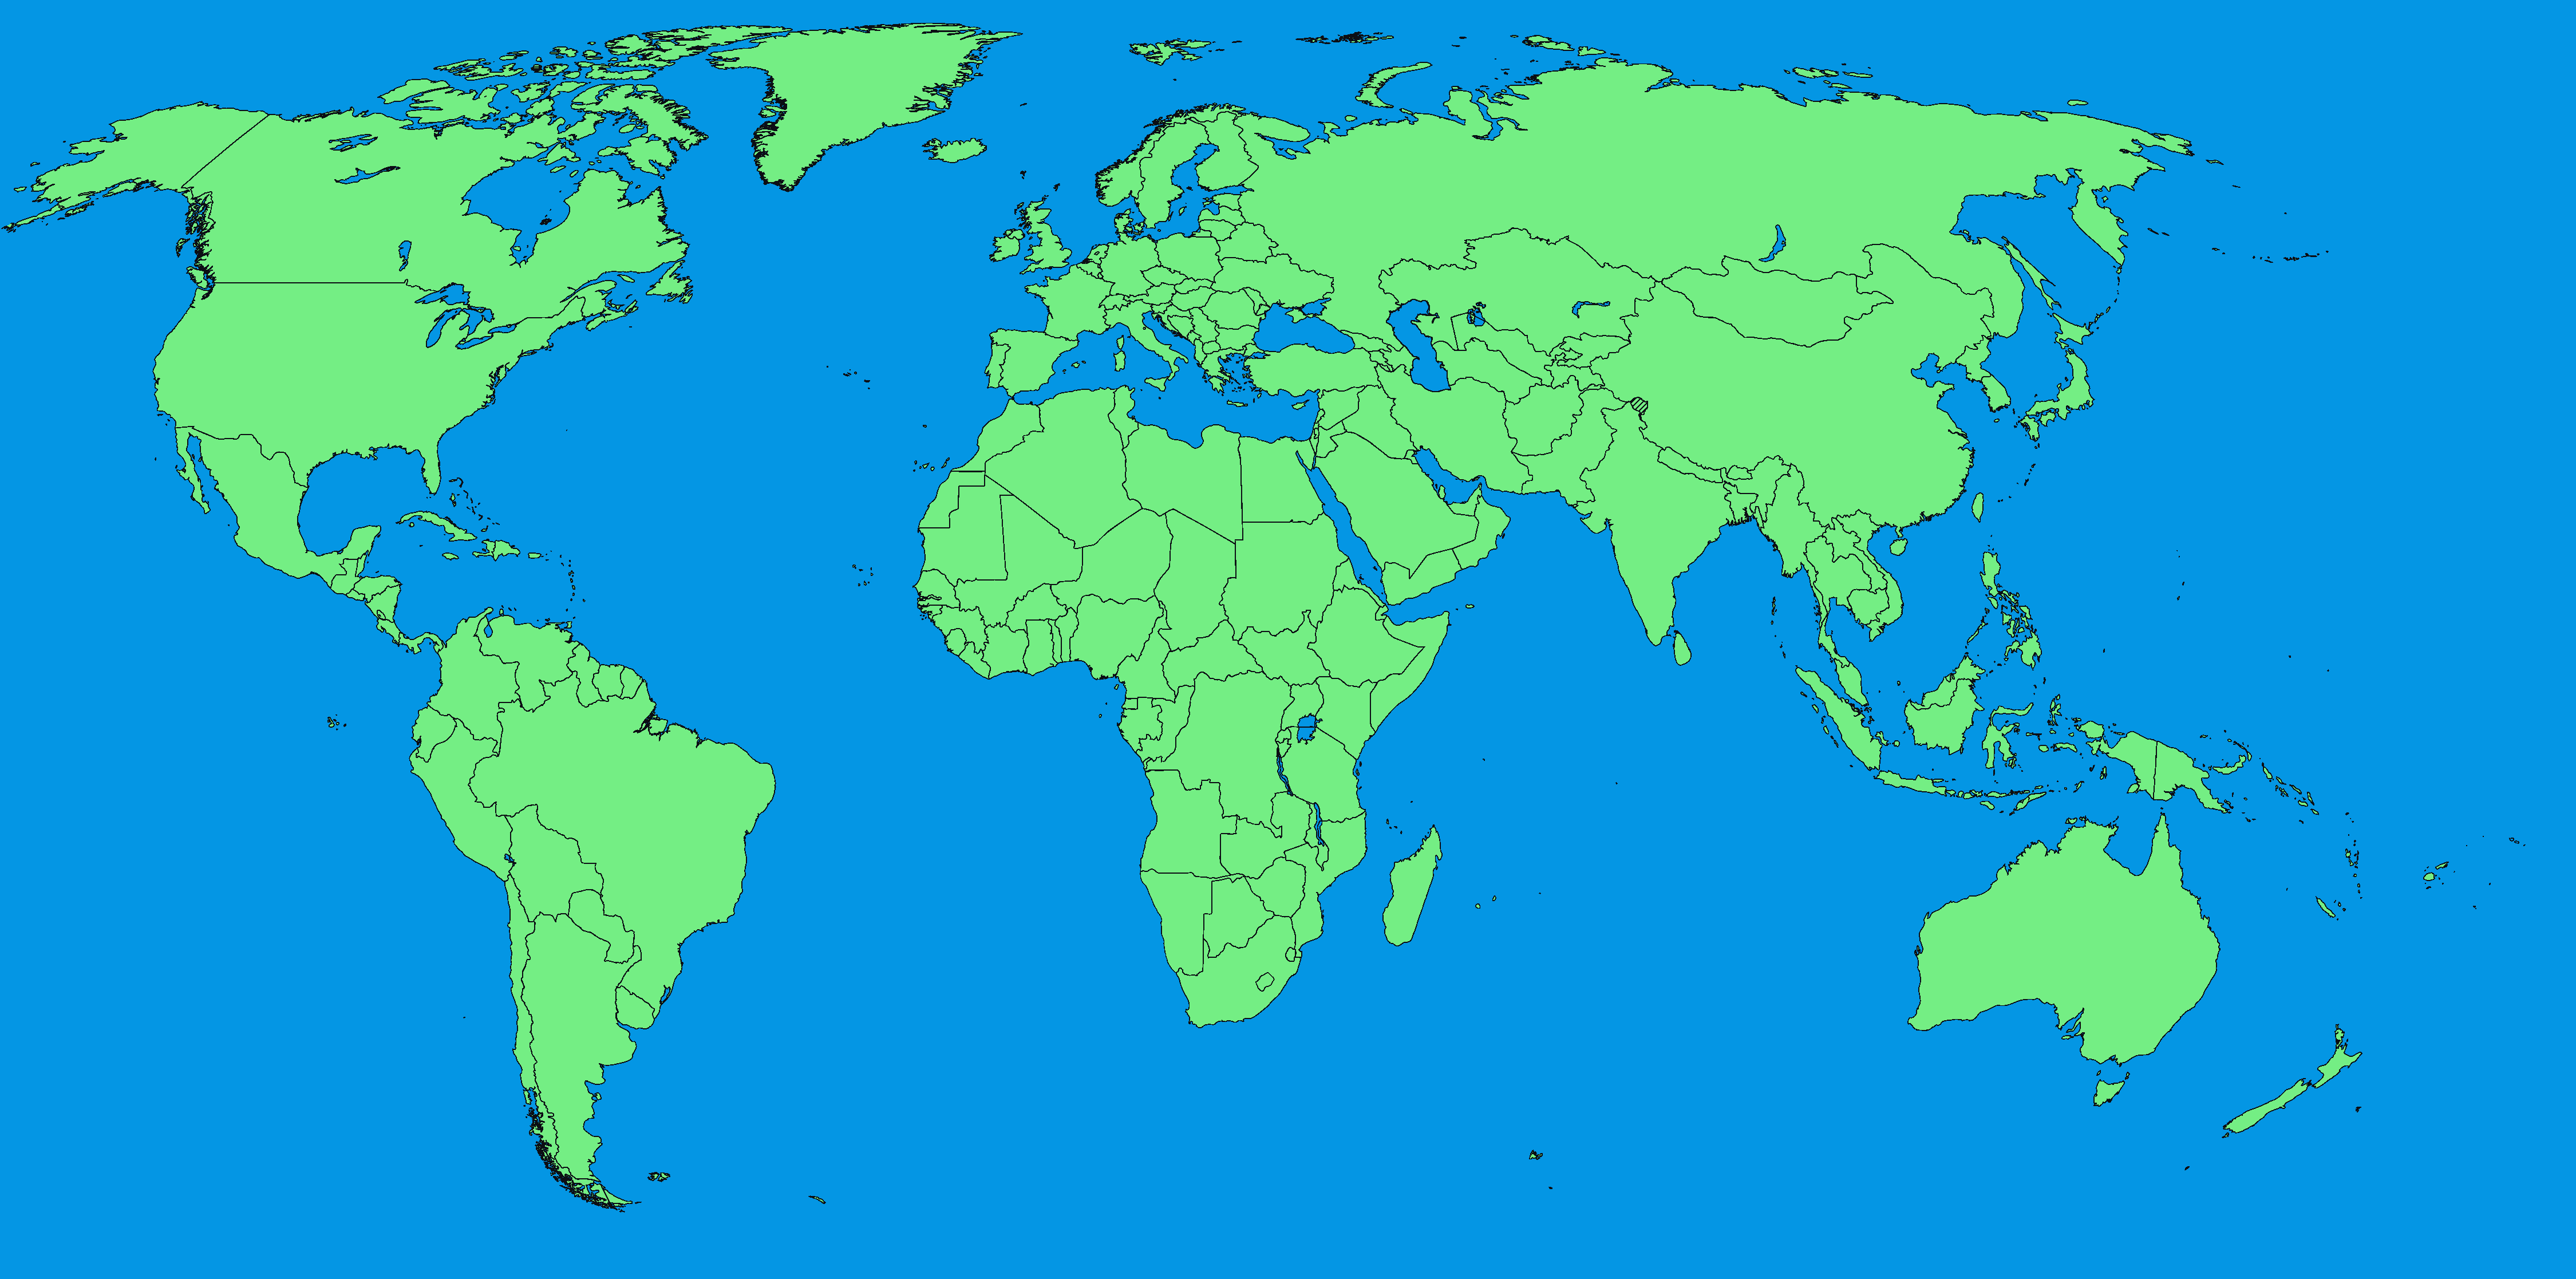 Description A Large Blank World Map With Oceans Marked In Blue Edited